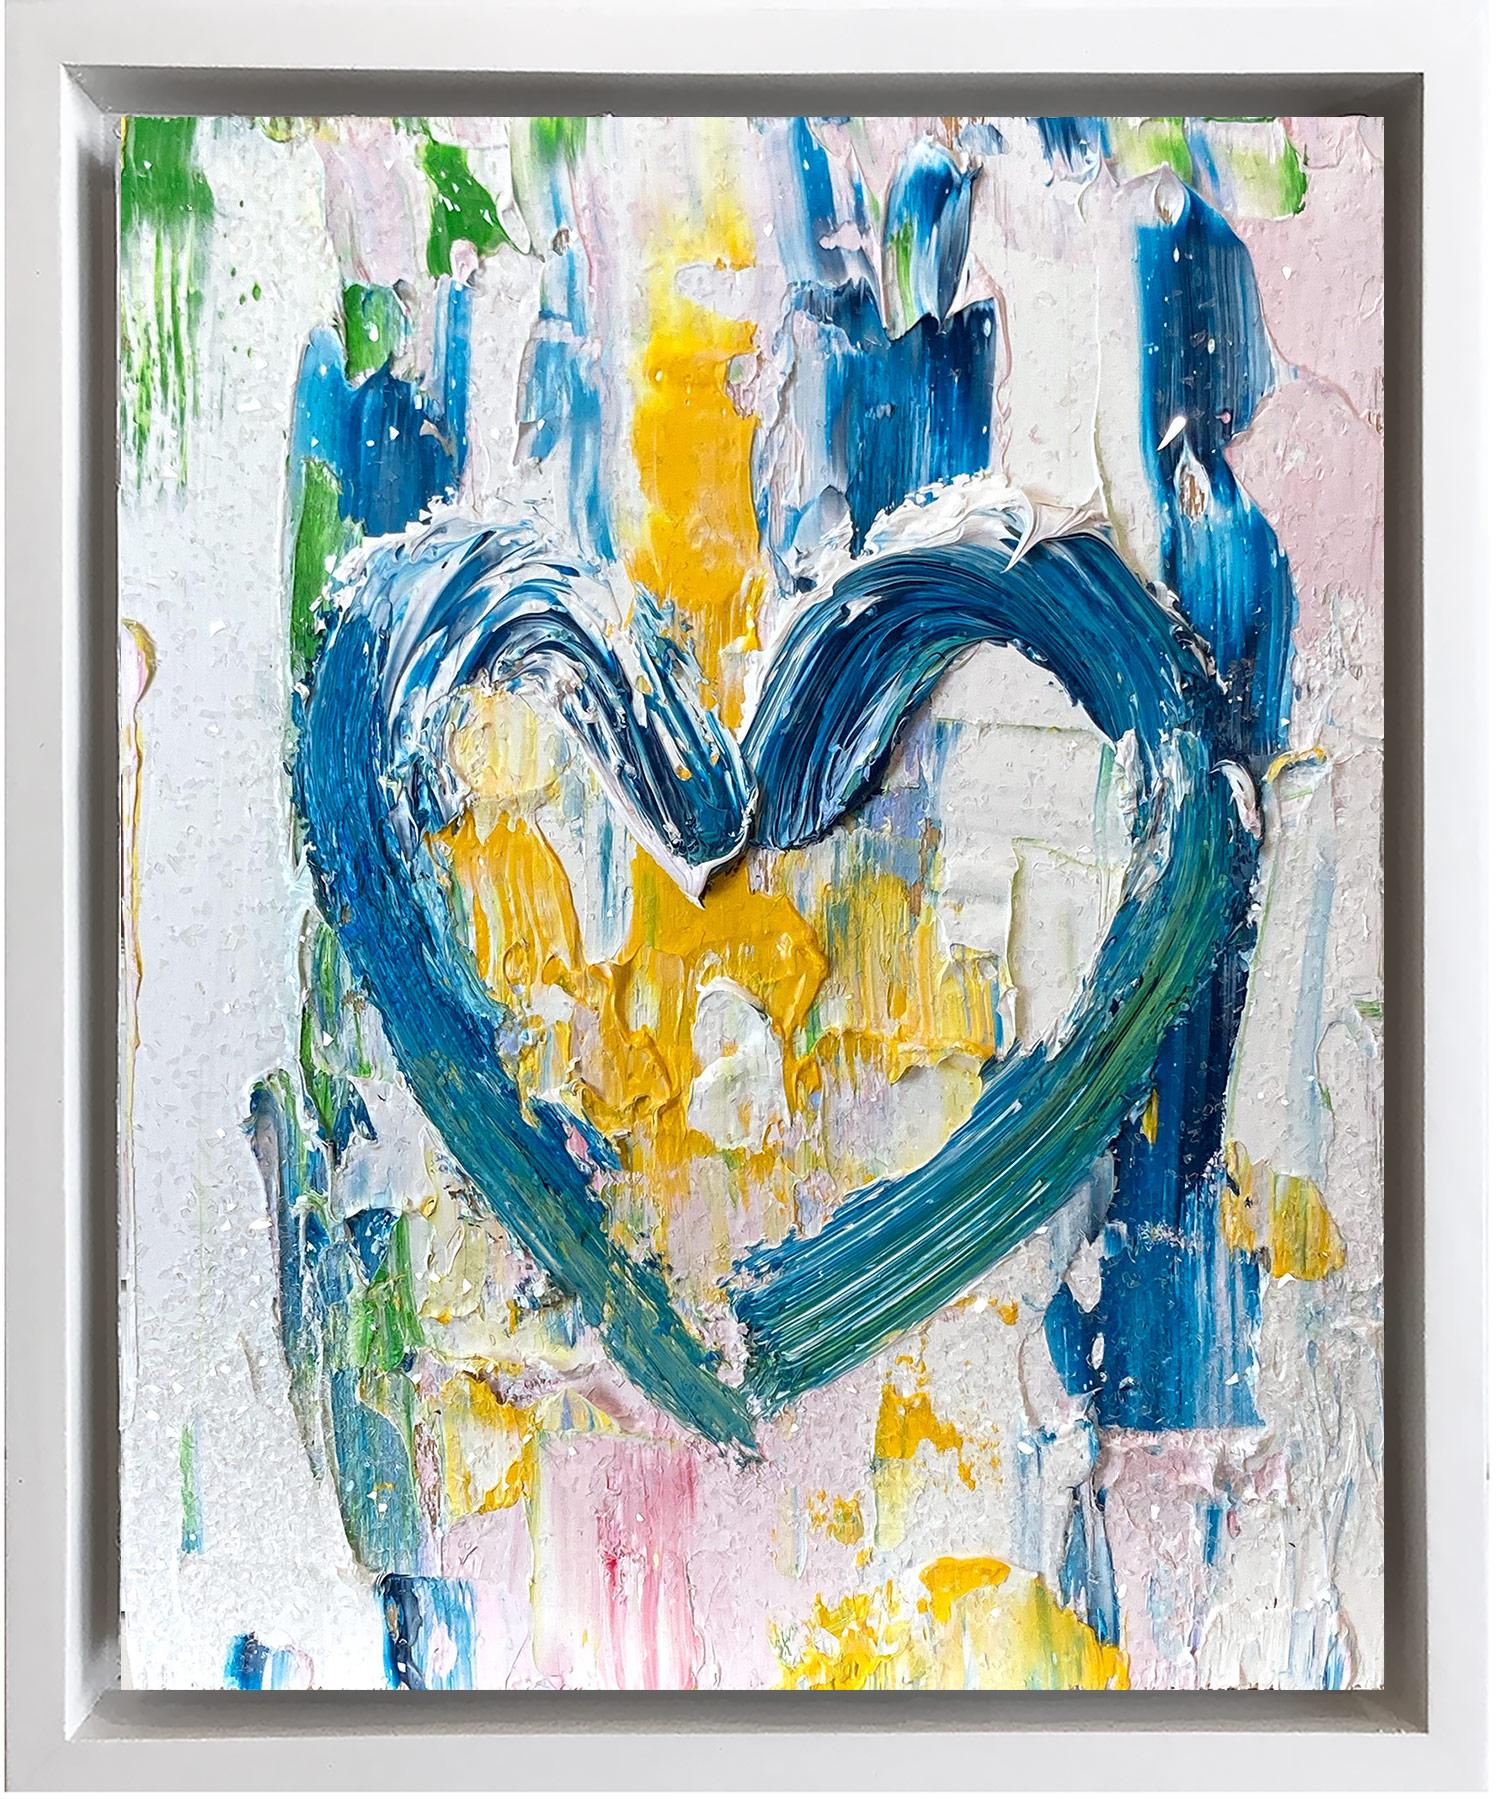 Cindy Shaoul Figurative Painting - "My Take Me Away Heart" Colorful Pop Art Oil Painting with White Floater Frame